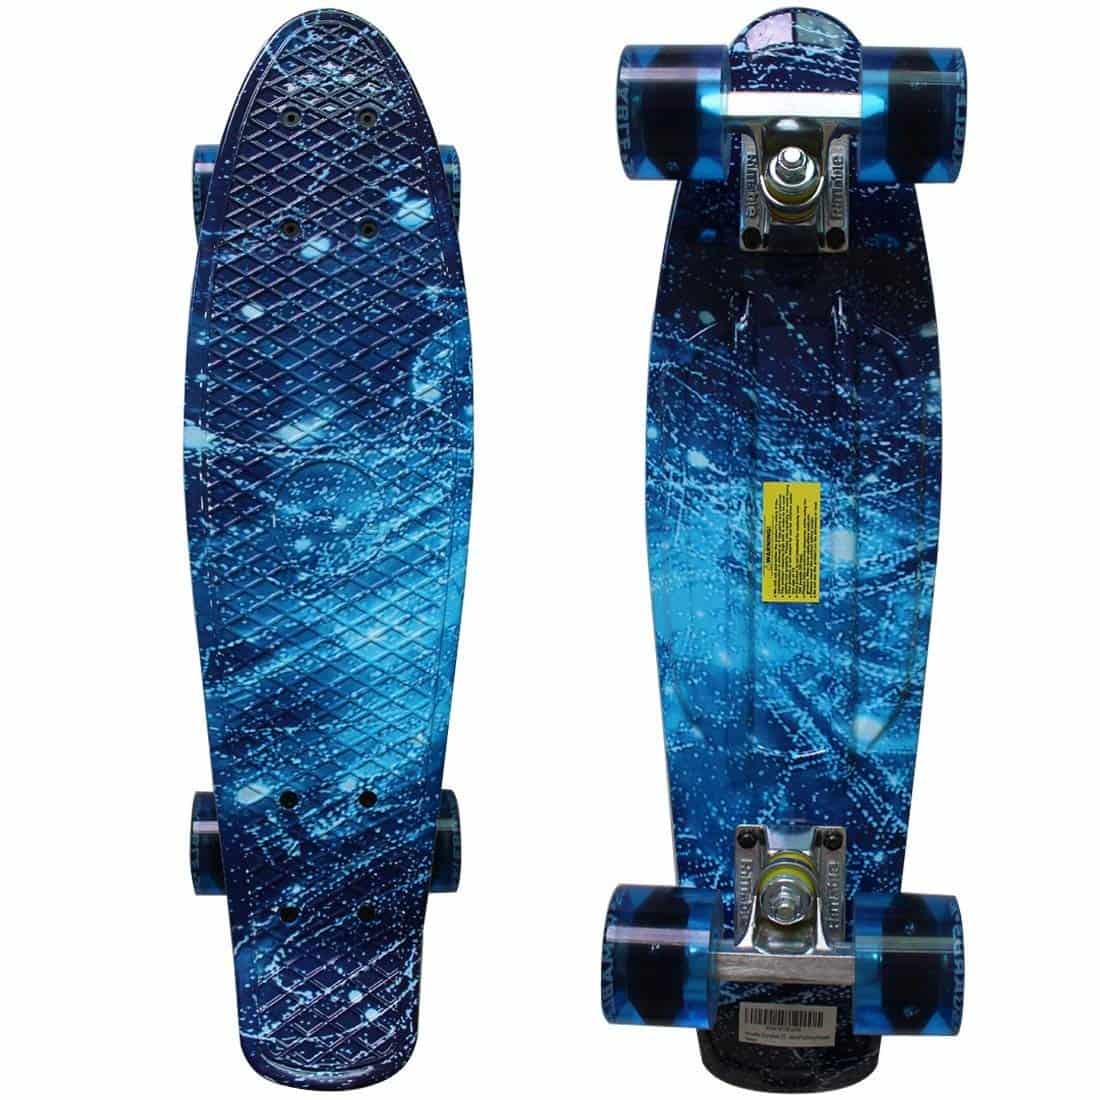 RIMABLE skateboard review best